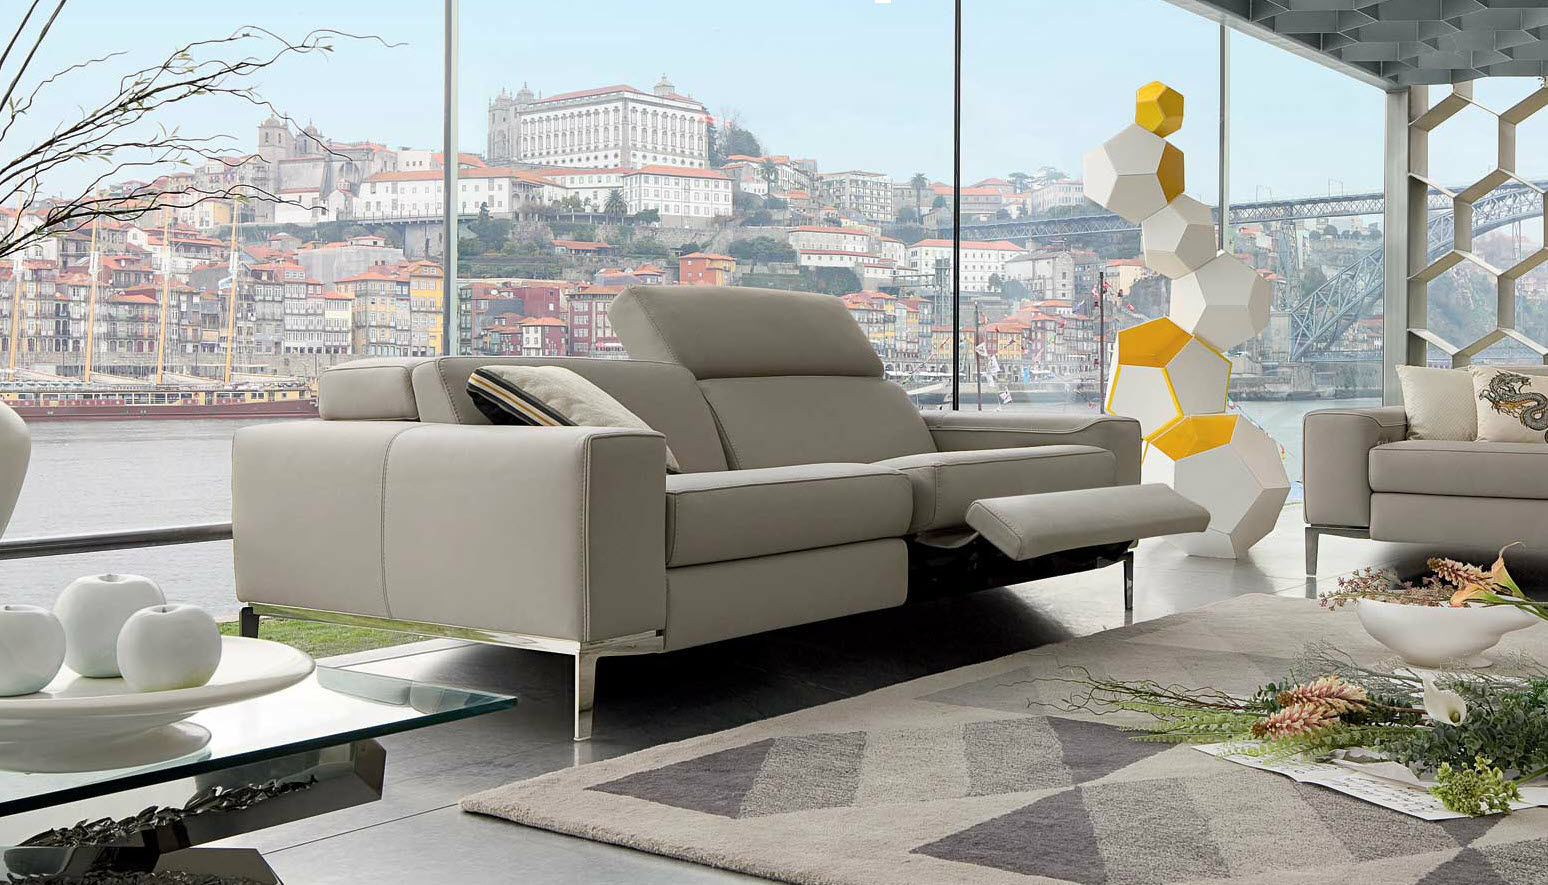 Contemporary Reclining With Wonderful Contemporary Reclining Sofa Furniture With Grey Color Design And Glass Wall Decoration Ideas For Inspiration Bedroom 16 Small Living Room With Reclining Sofas To Fit Your Home Decor